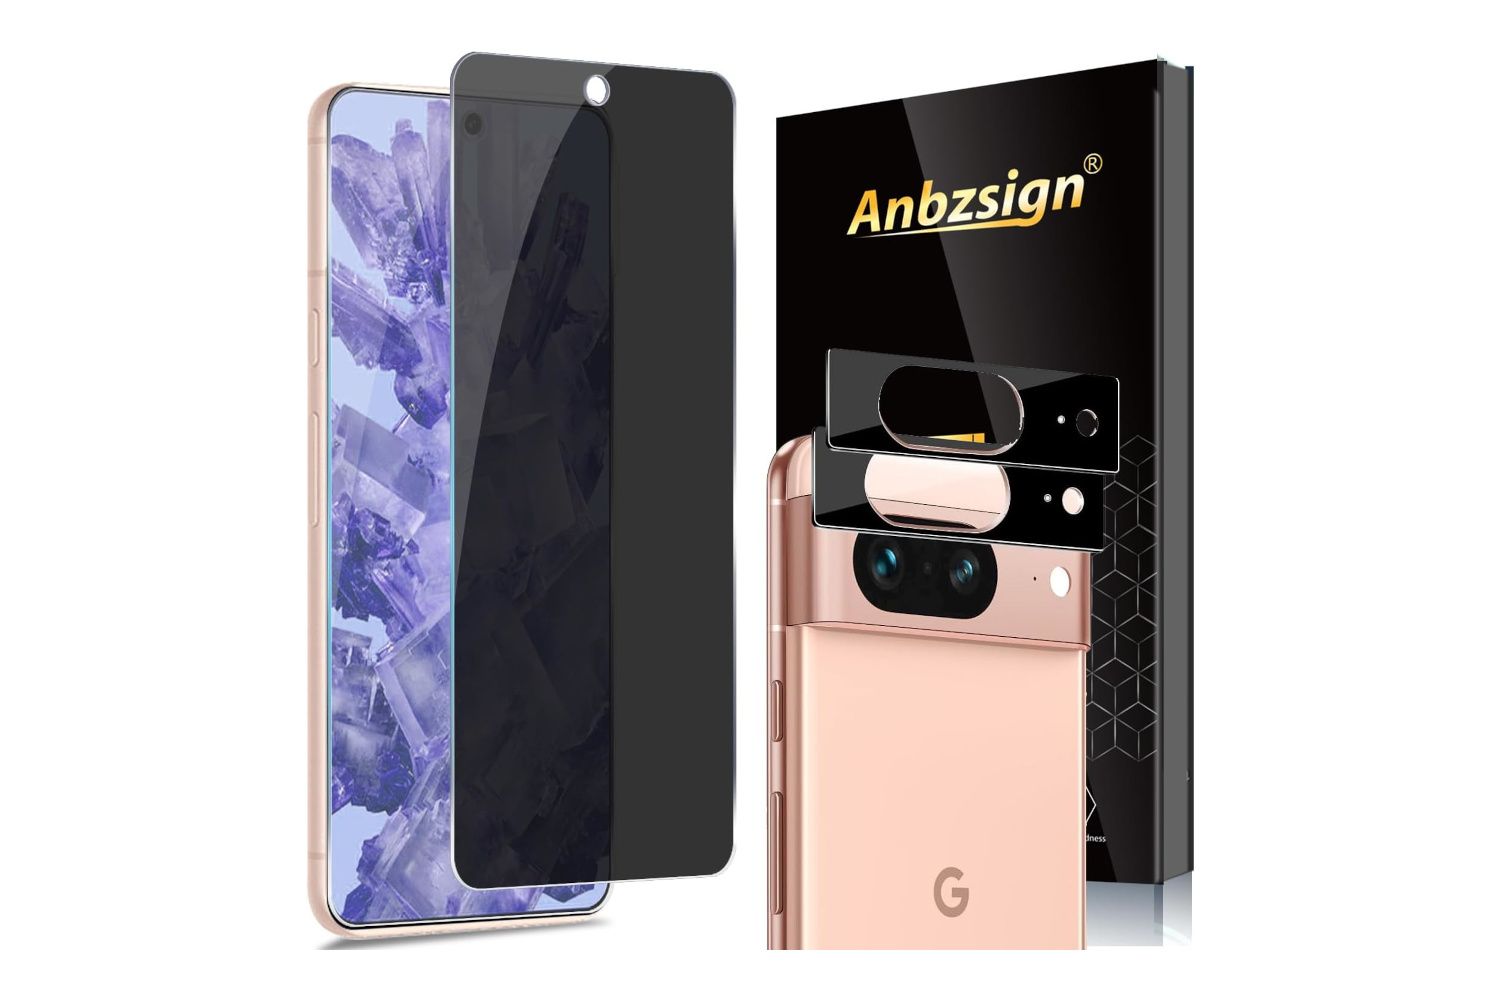 The Anbzsign privacy screen protector on a blank background.